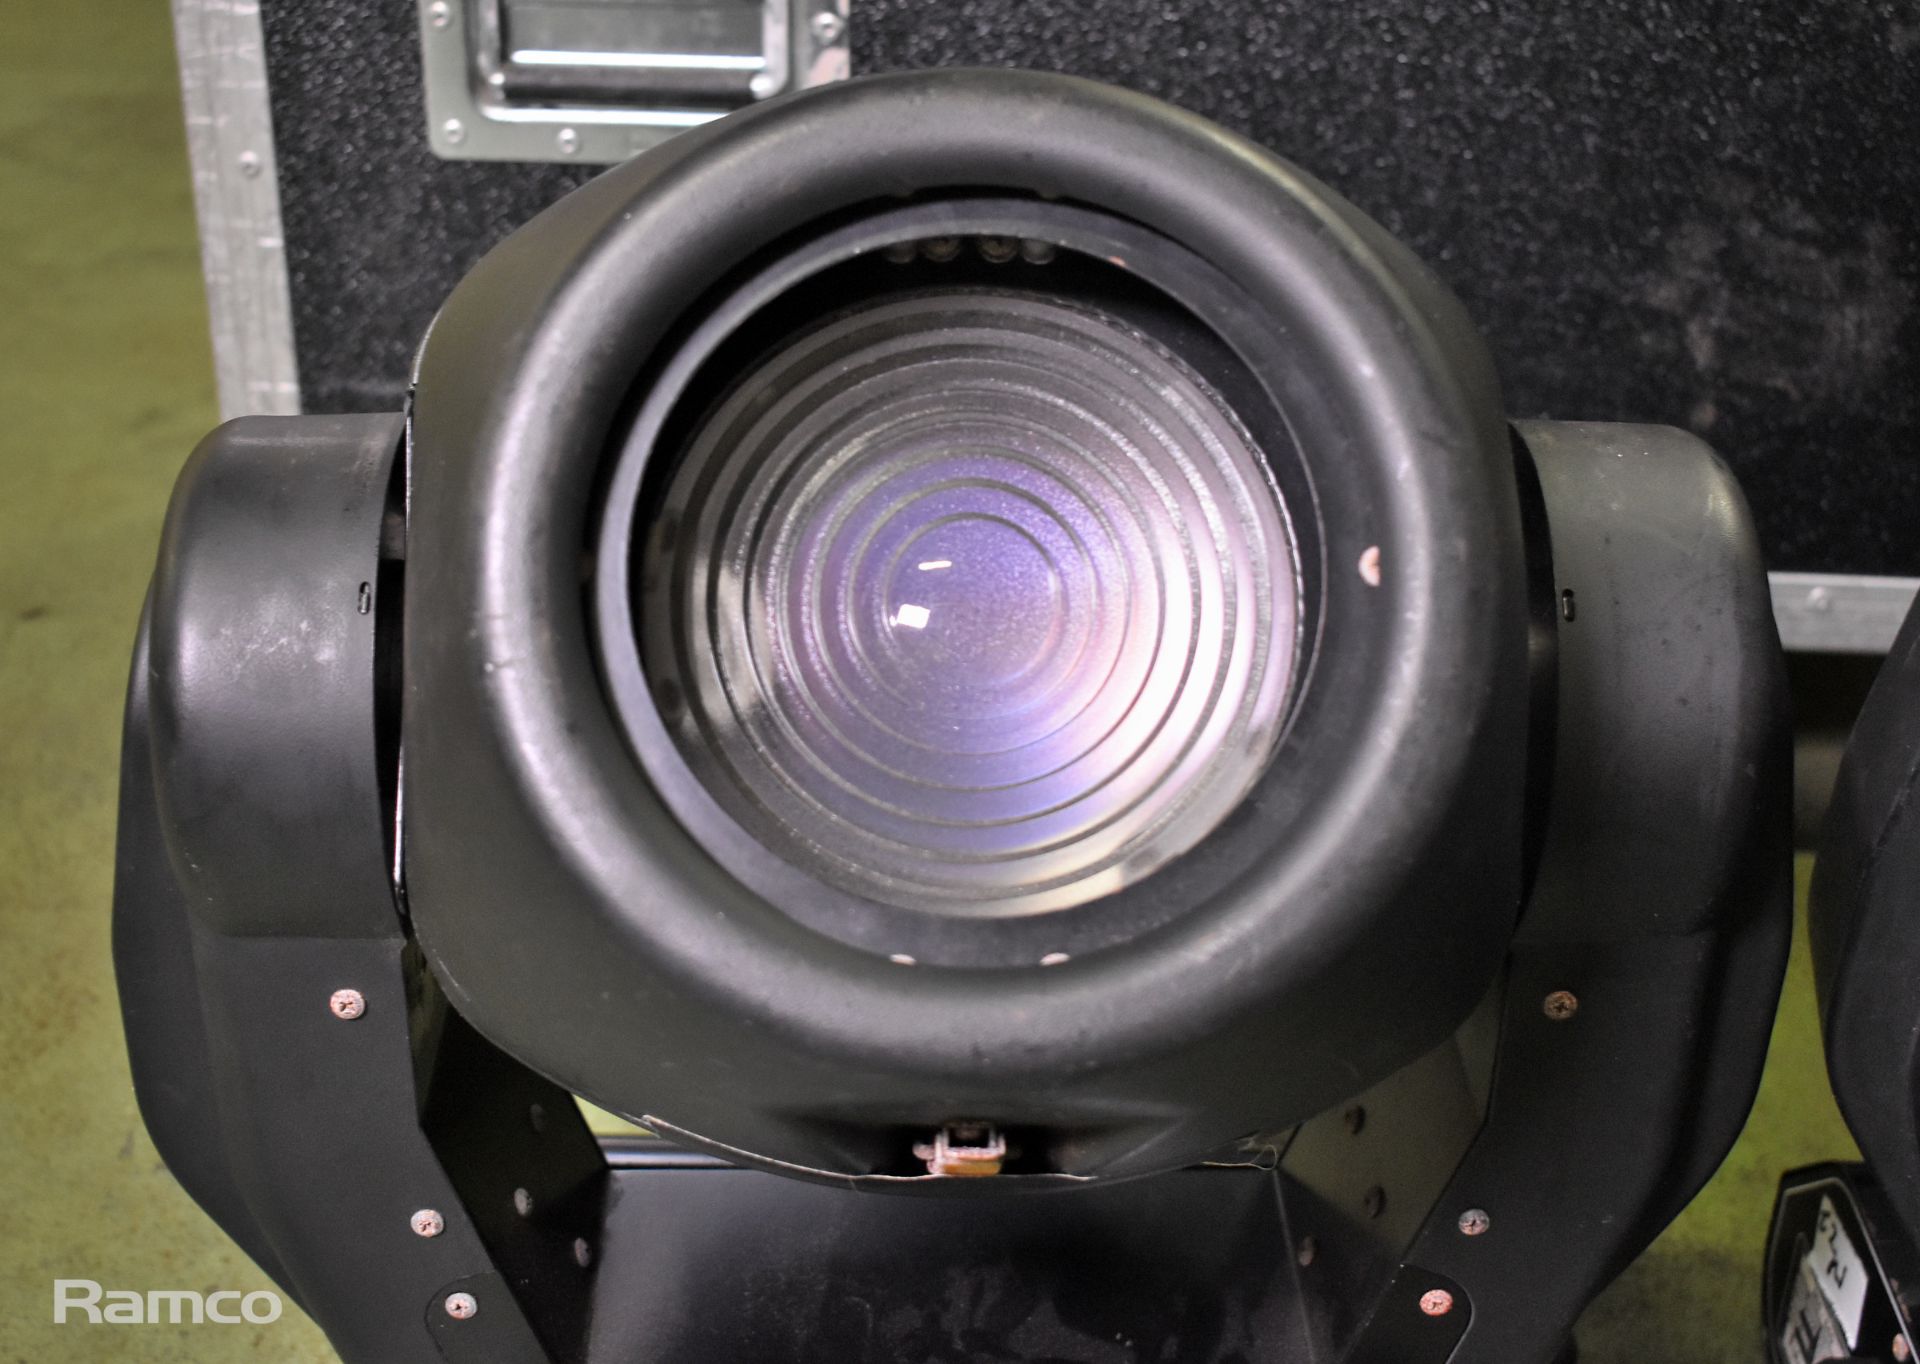 Two moving heads 640 Future light in flight case - L 1100 x W 460 x H 900mm - Image 3 of 13